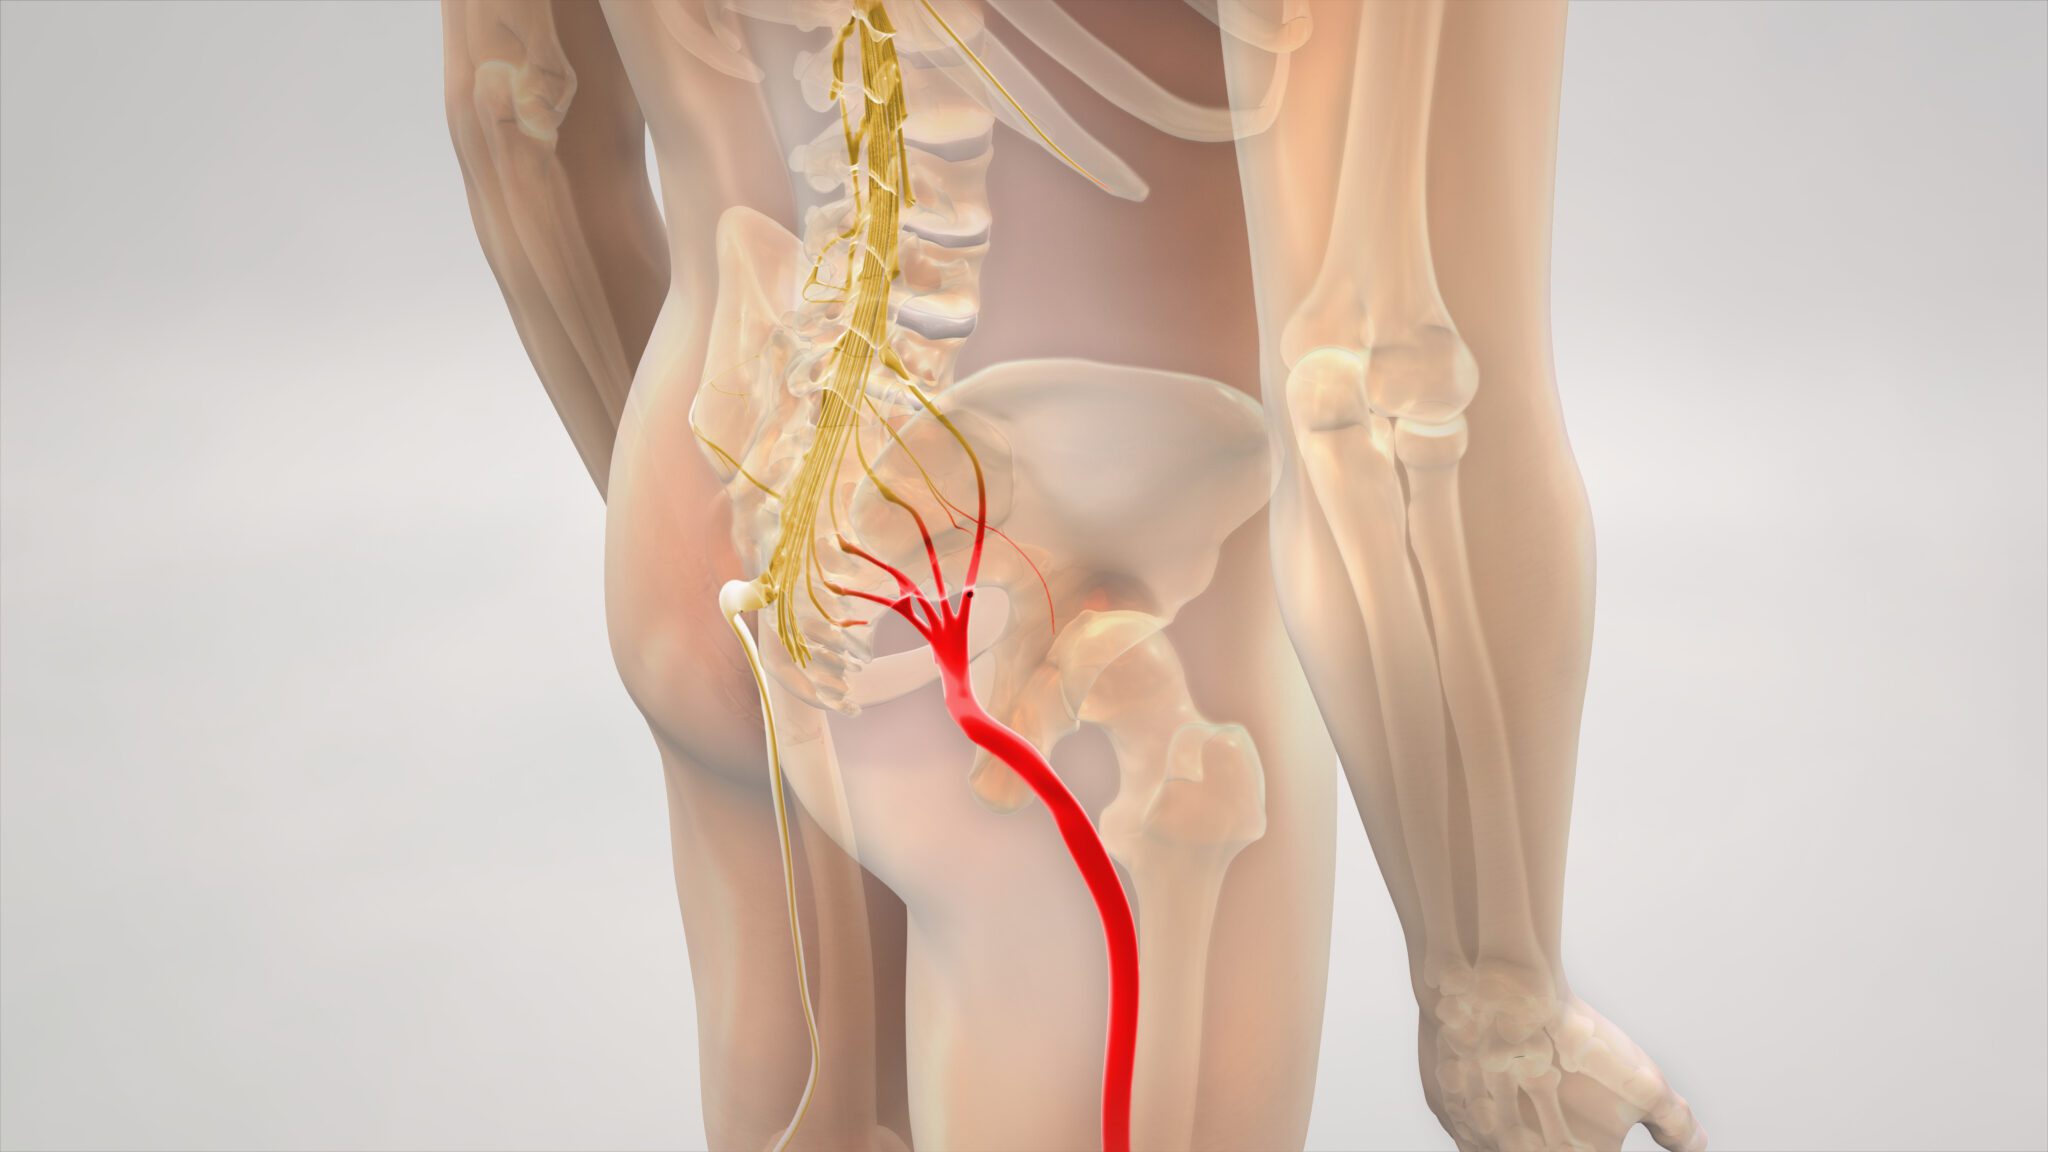 https://spinehealth.org/wp-content/uploads/2023/01/do-i-have-sciatica-scaled.jpg